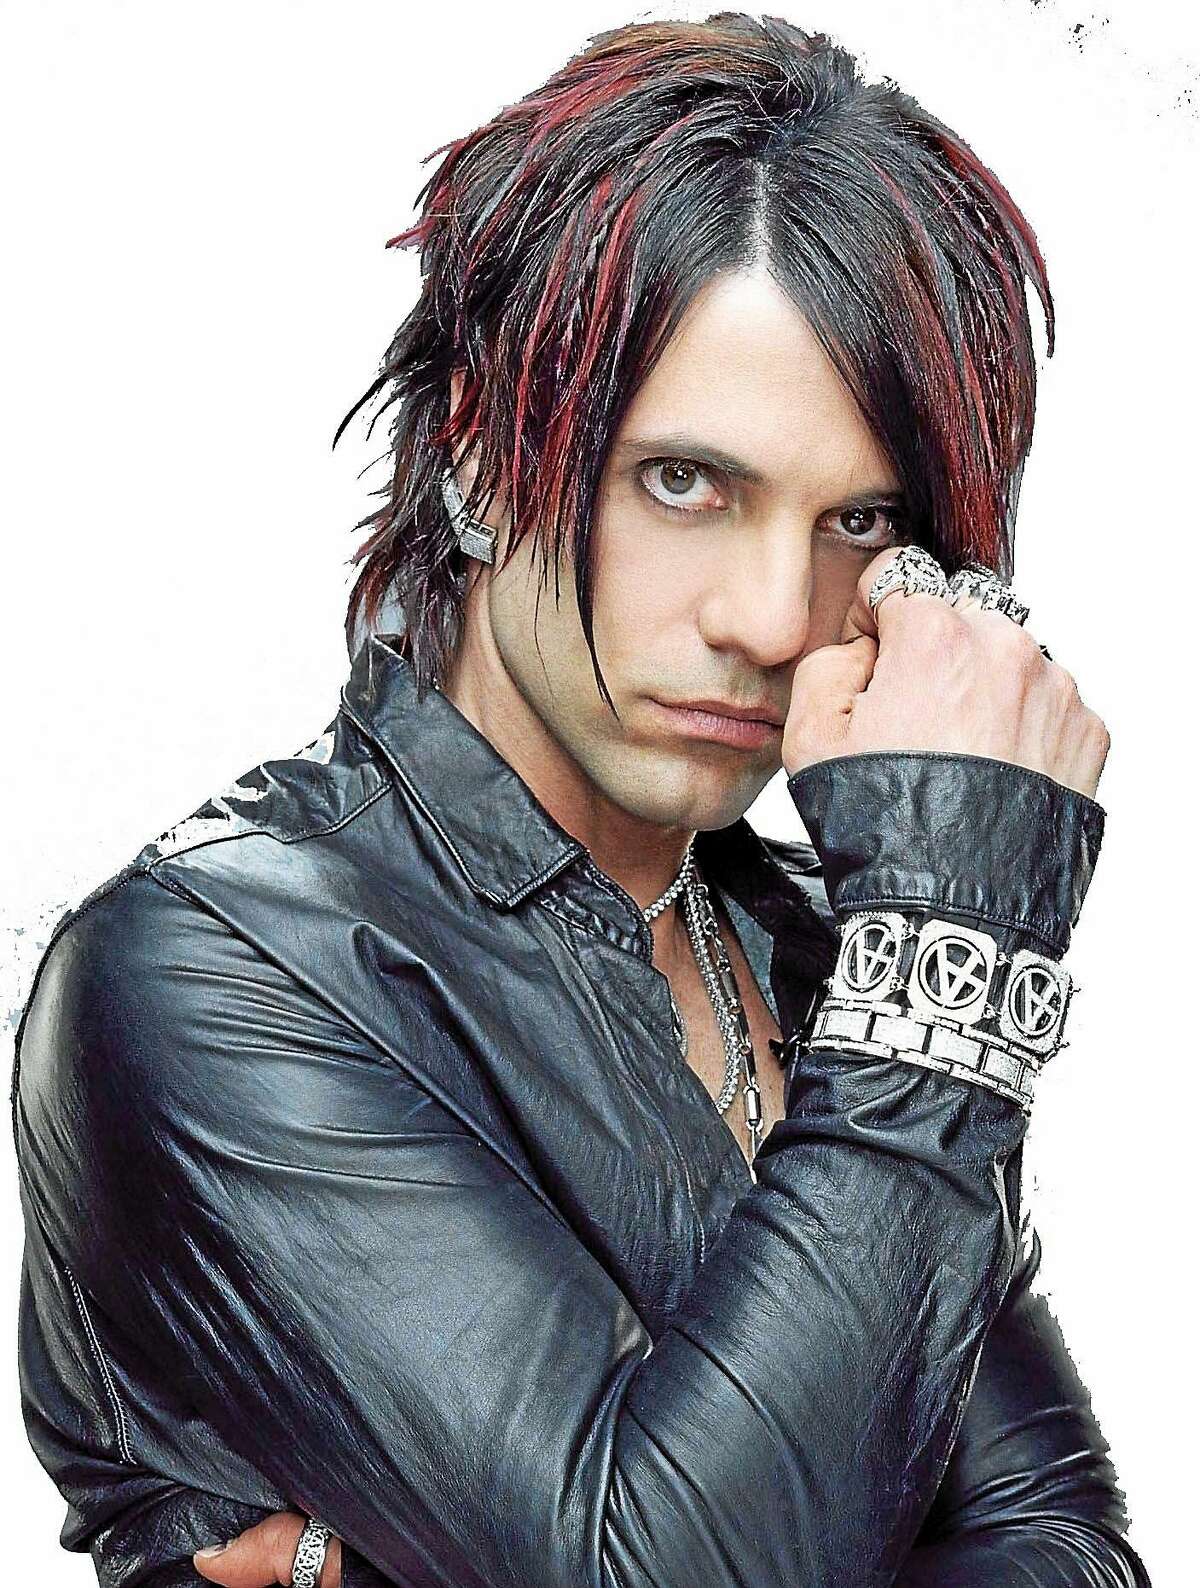 Concert Connection Criss Angel returns to Foxwoods in January